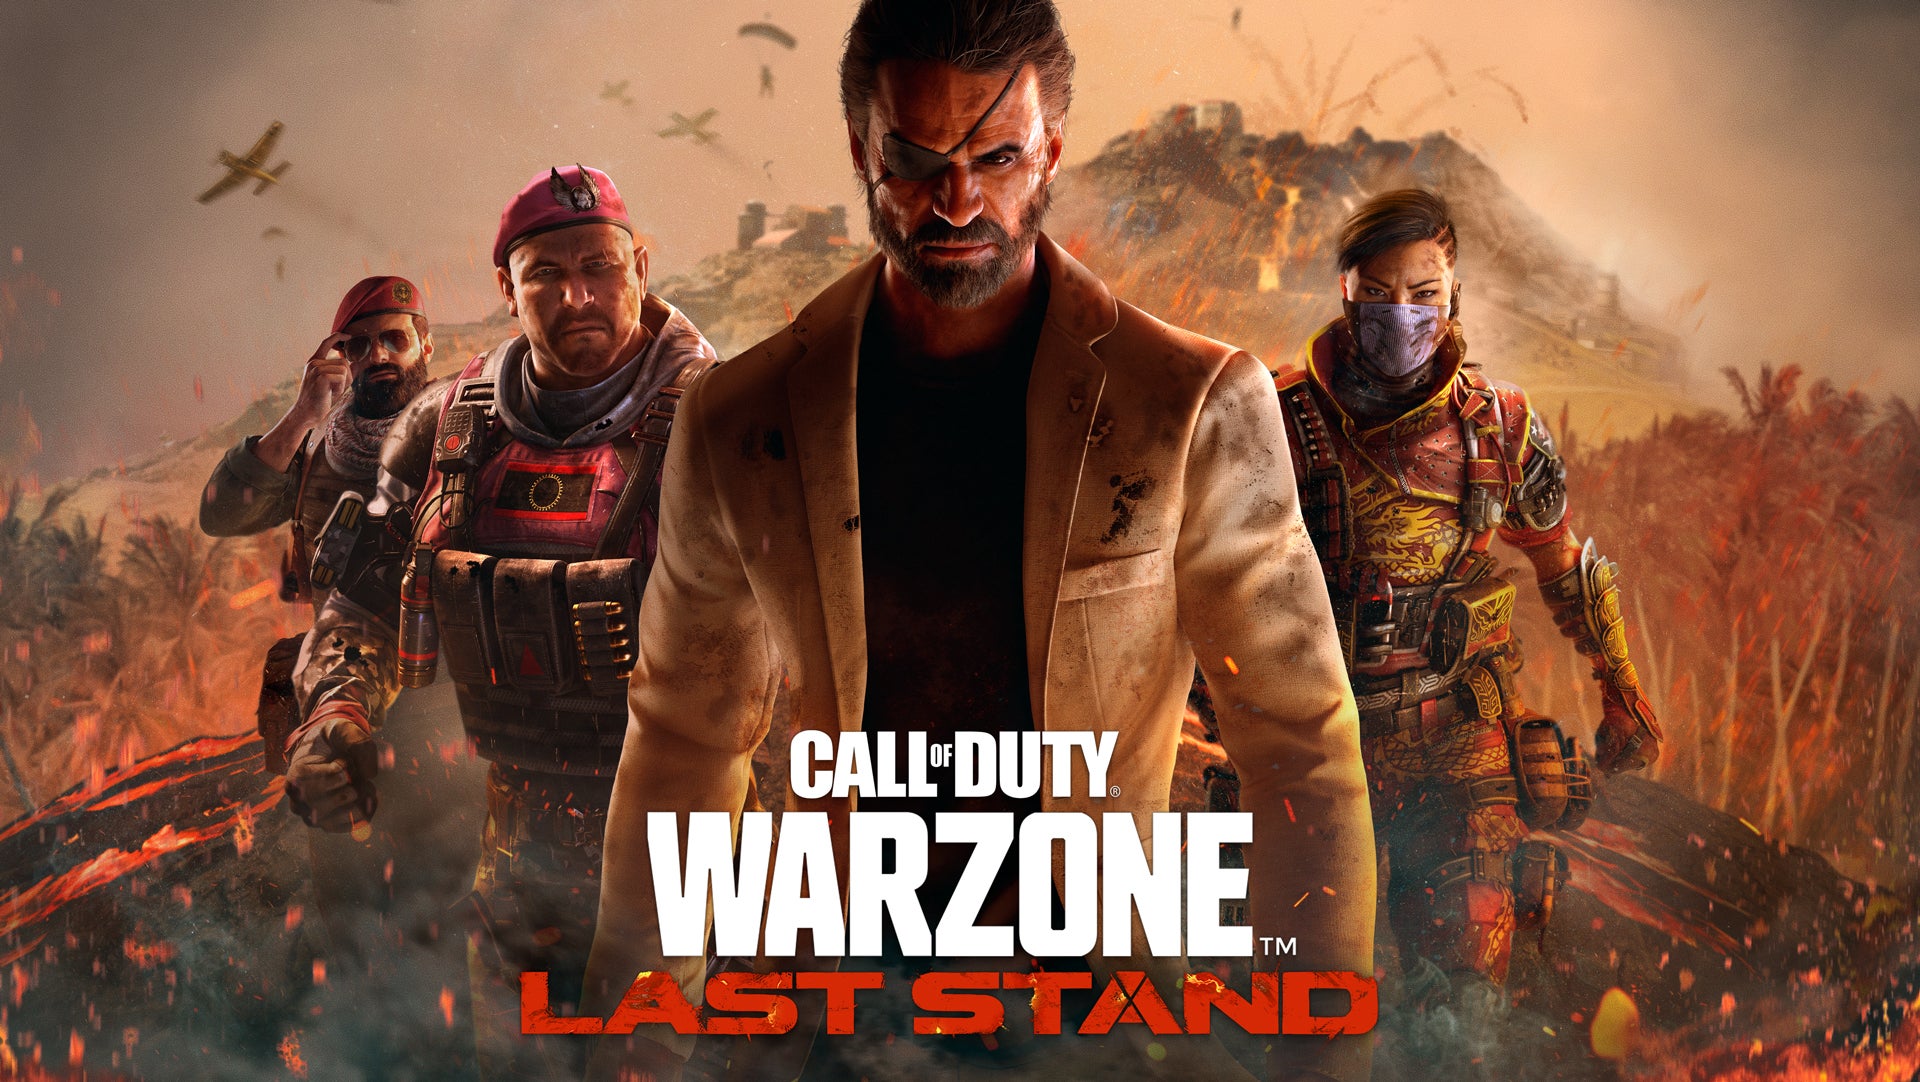 Image for Call of Duty: Vanguard and Warzone's fifth and final season has you playing the villain